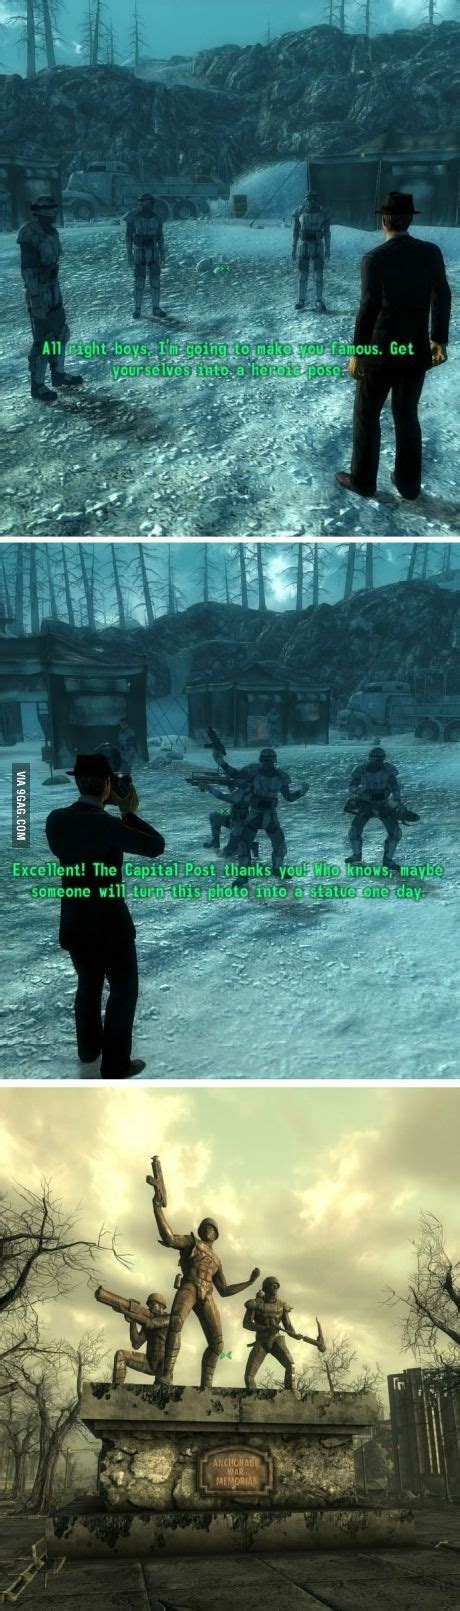 Fallout Has The Best Attention To Detail Gaming Fallout Funny